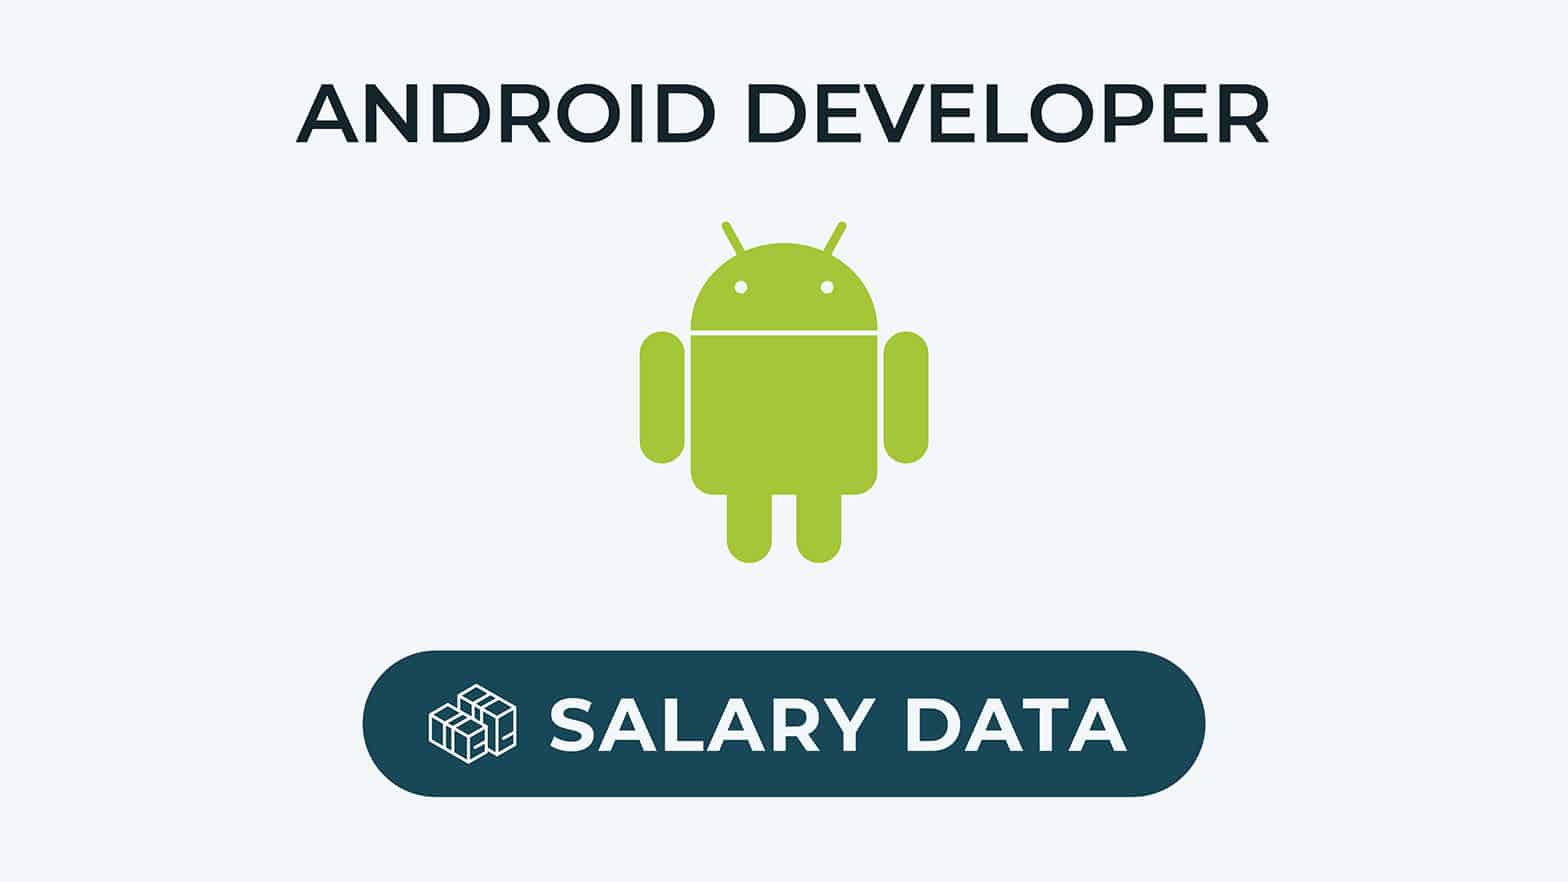 Android developer salary